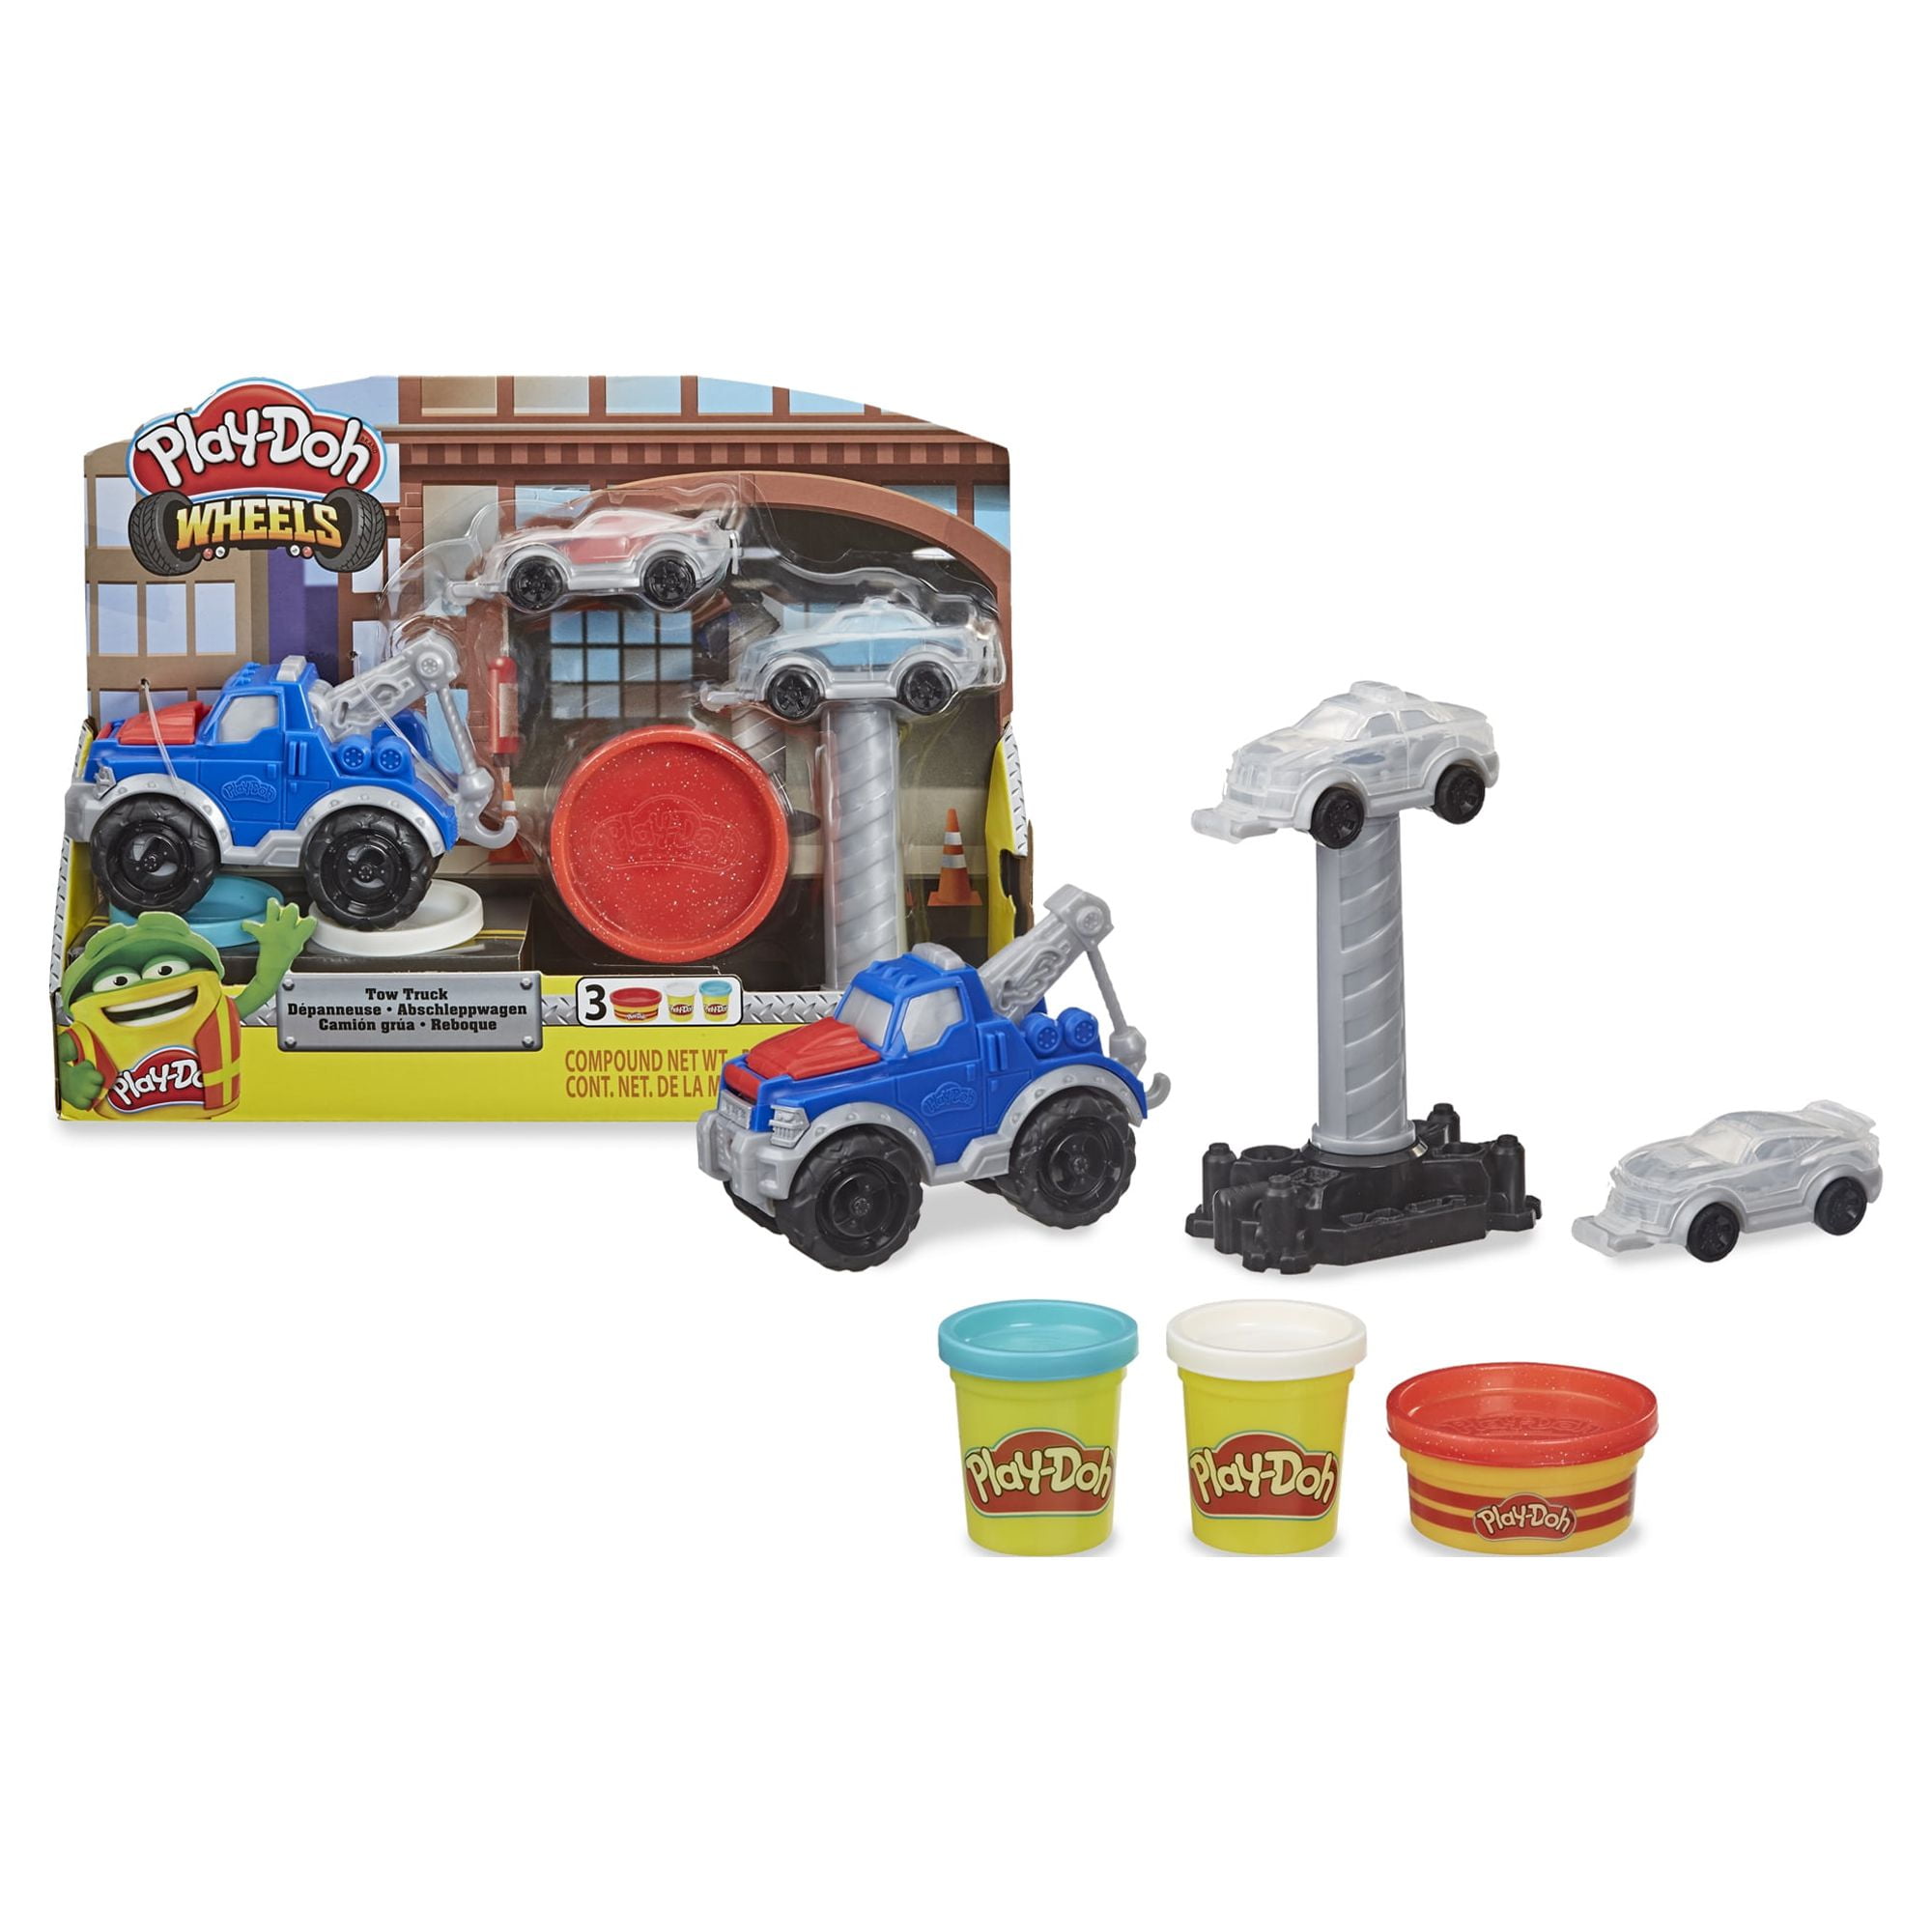  Play-Doh Toolin' Around Toy Tools Set for Kids with 3 Non-Toxic  Colors : Toys & Games